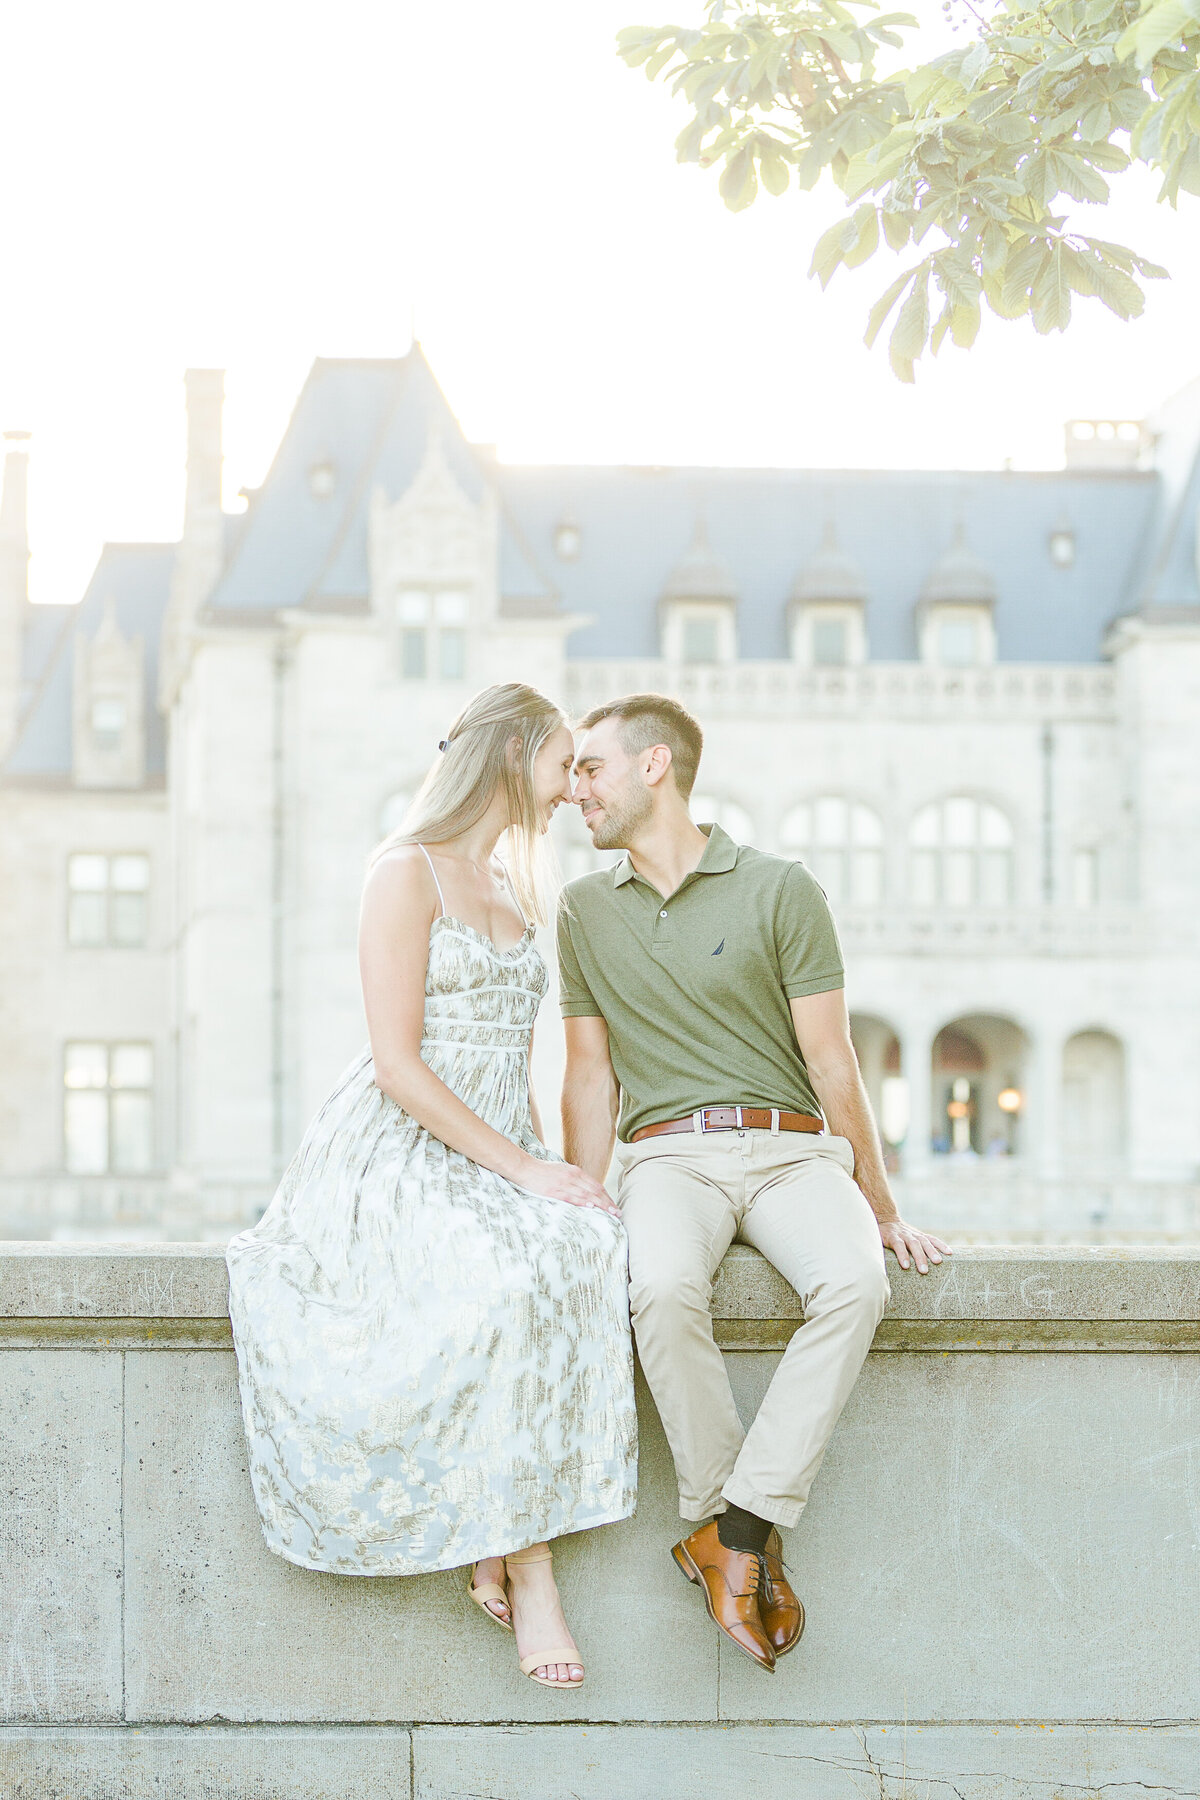 Couple sit beside each other on a stone wall at Salve Regina. Their heads are turned toward each other and their foreheads resting together. Salve Regina's buildings are featured prominently in the background. Captured by Salve Regina wedding photographer Lia Rose Weddings